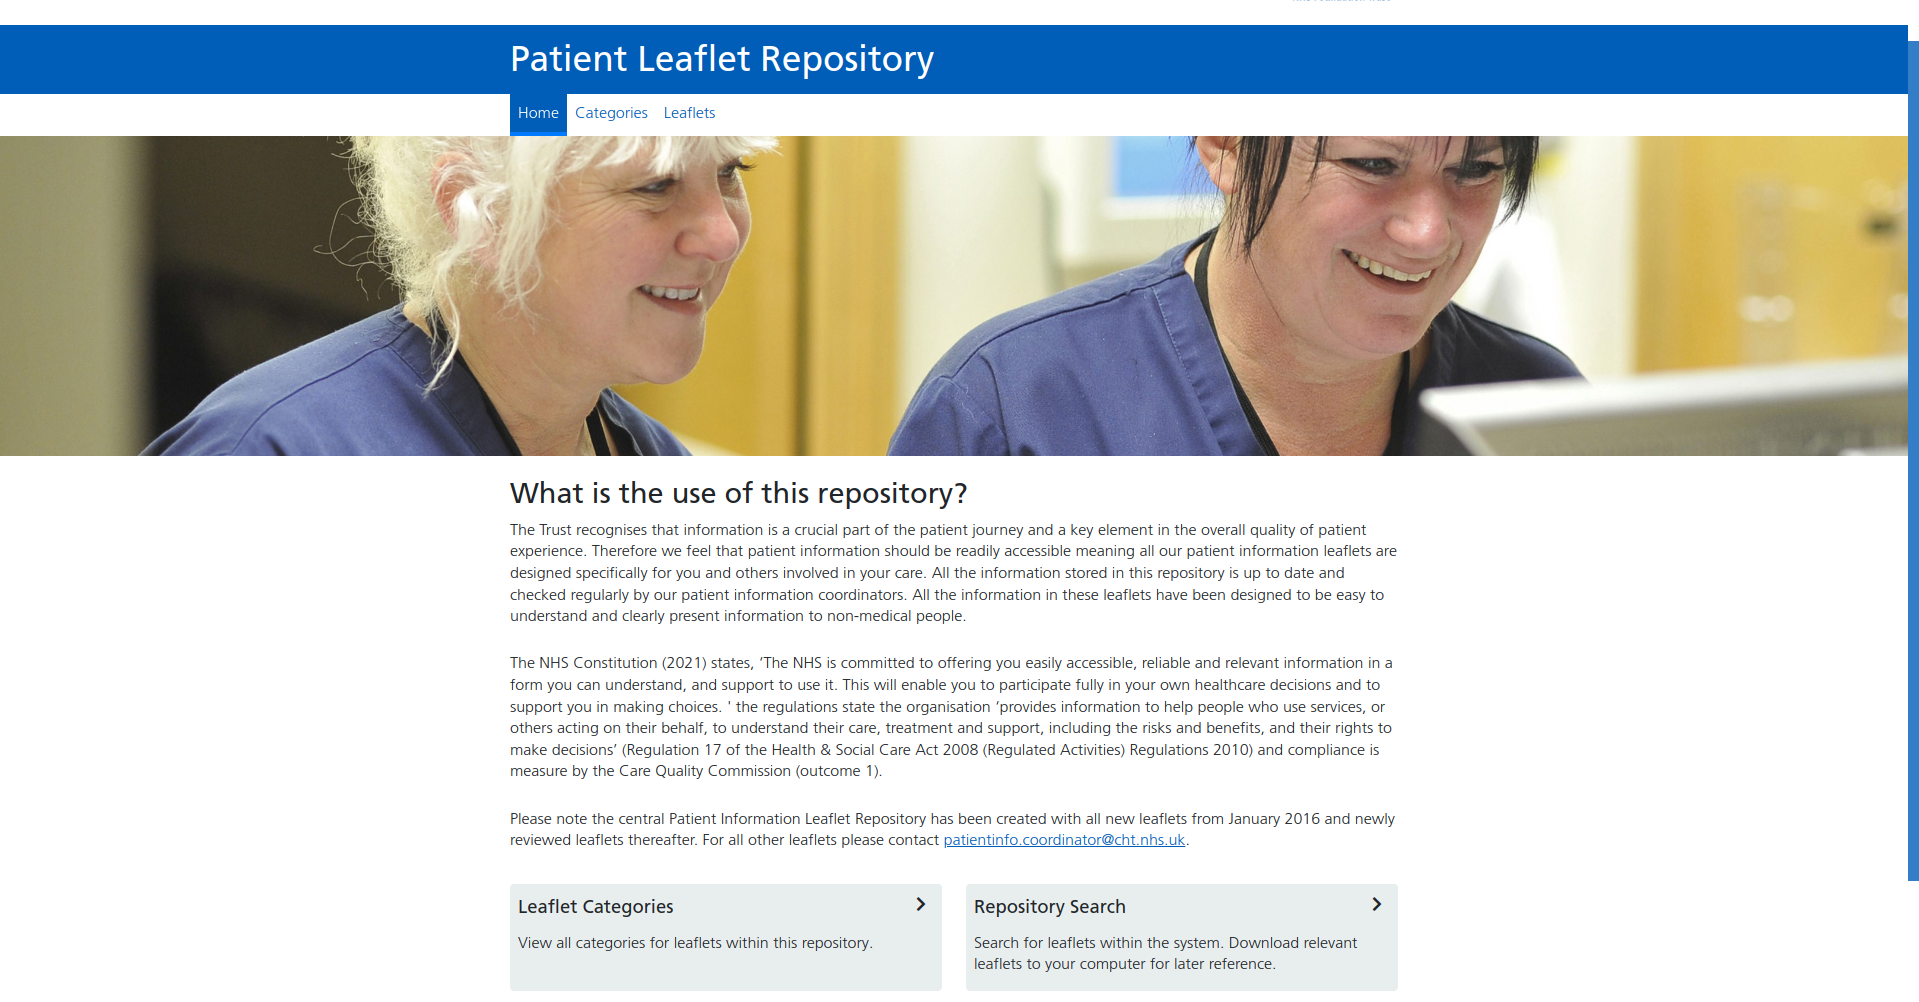 Patient leaflet repository